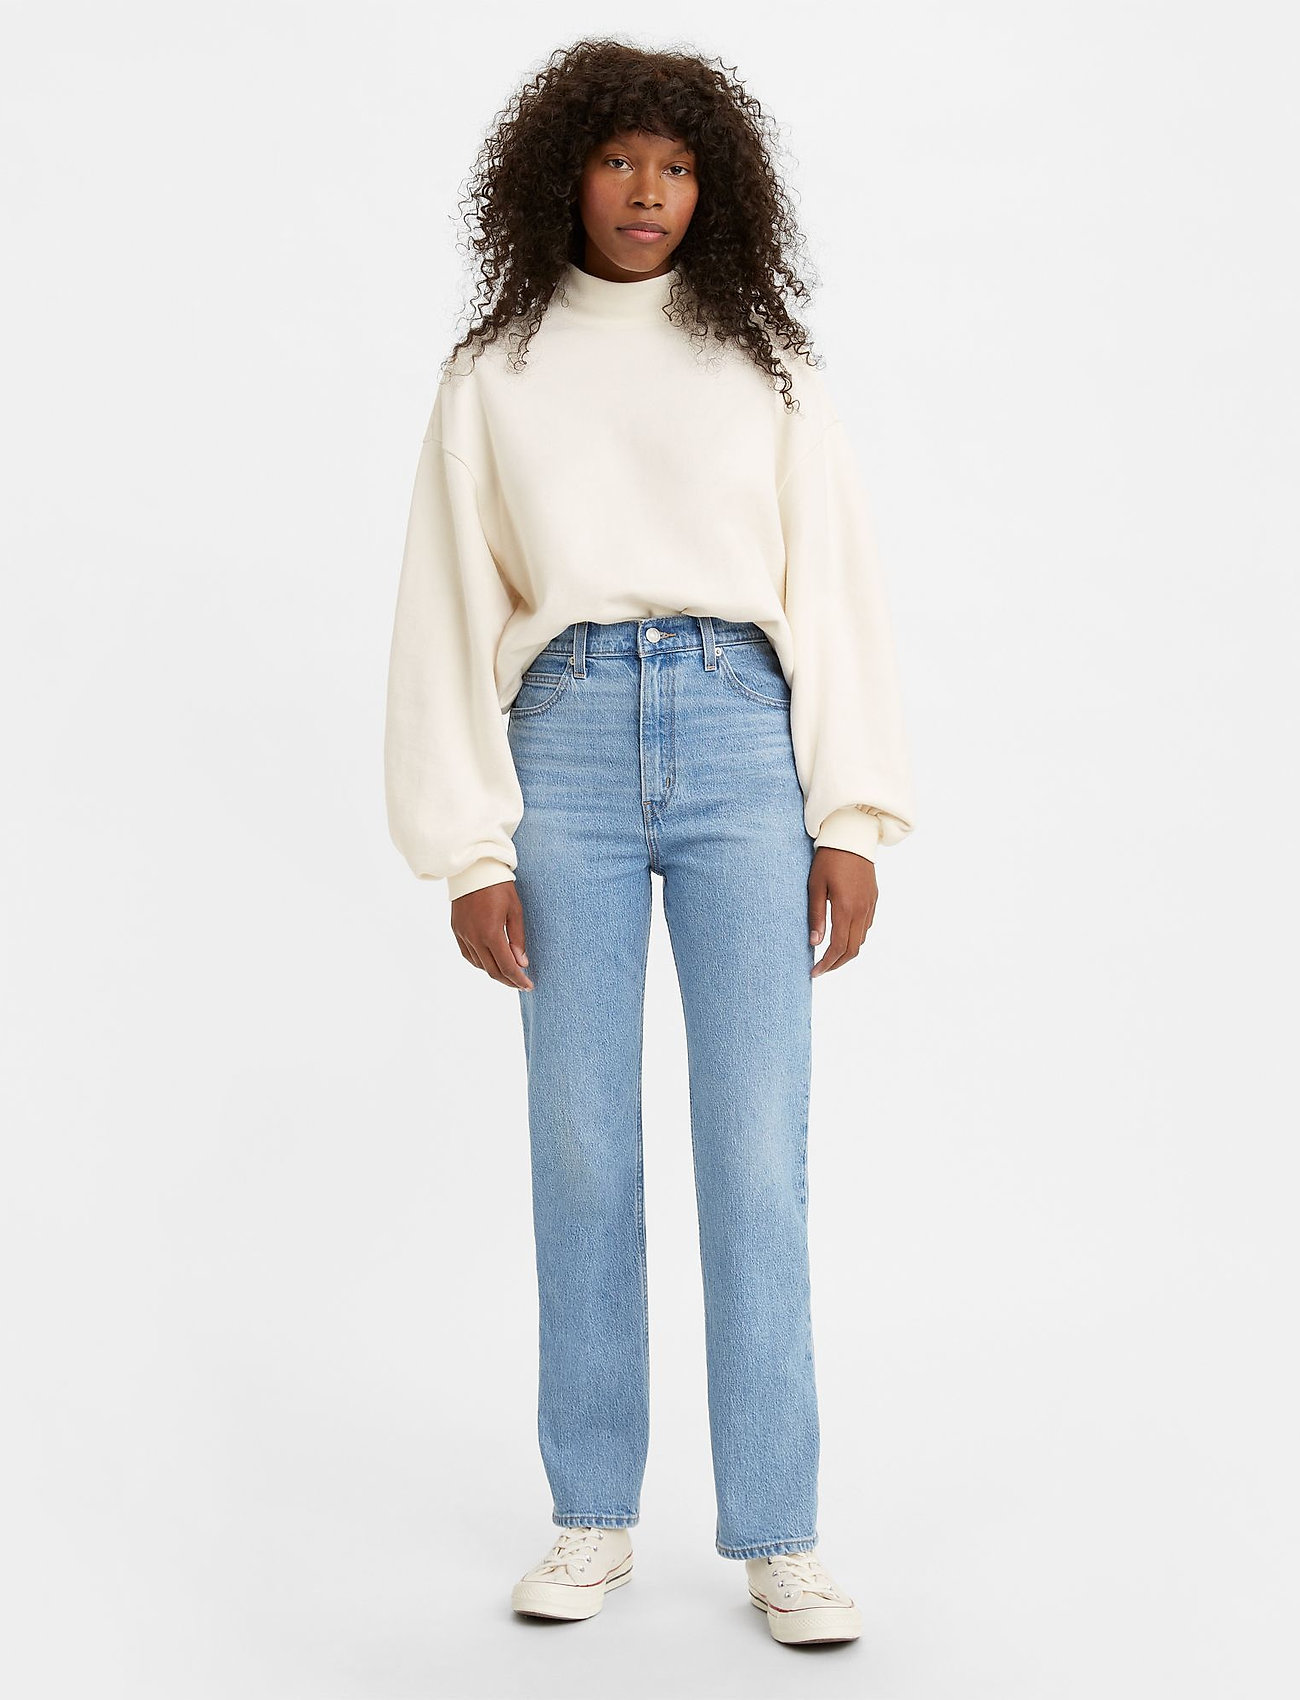 Levi's Women's High-Waisted Straight Jeans